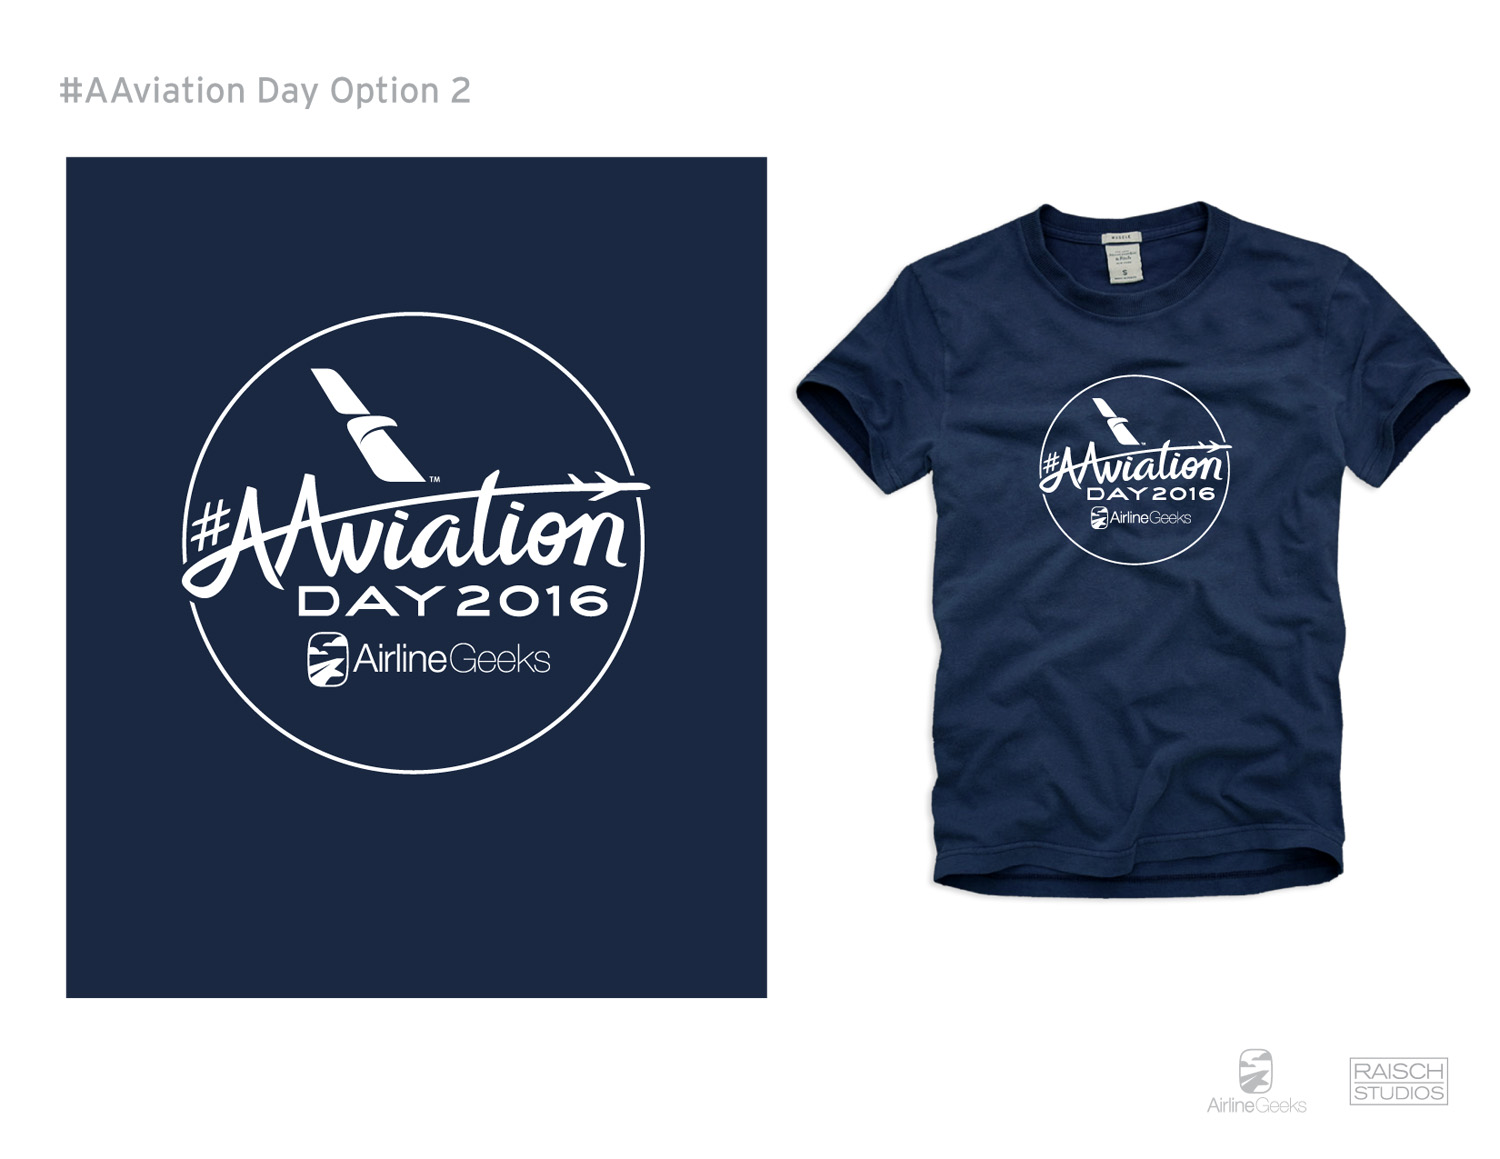 AAviation_Day_Shirts-June28-2A.jpg